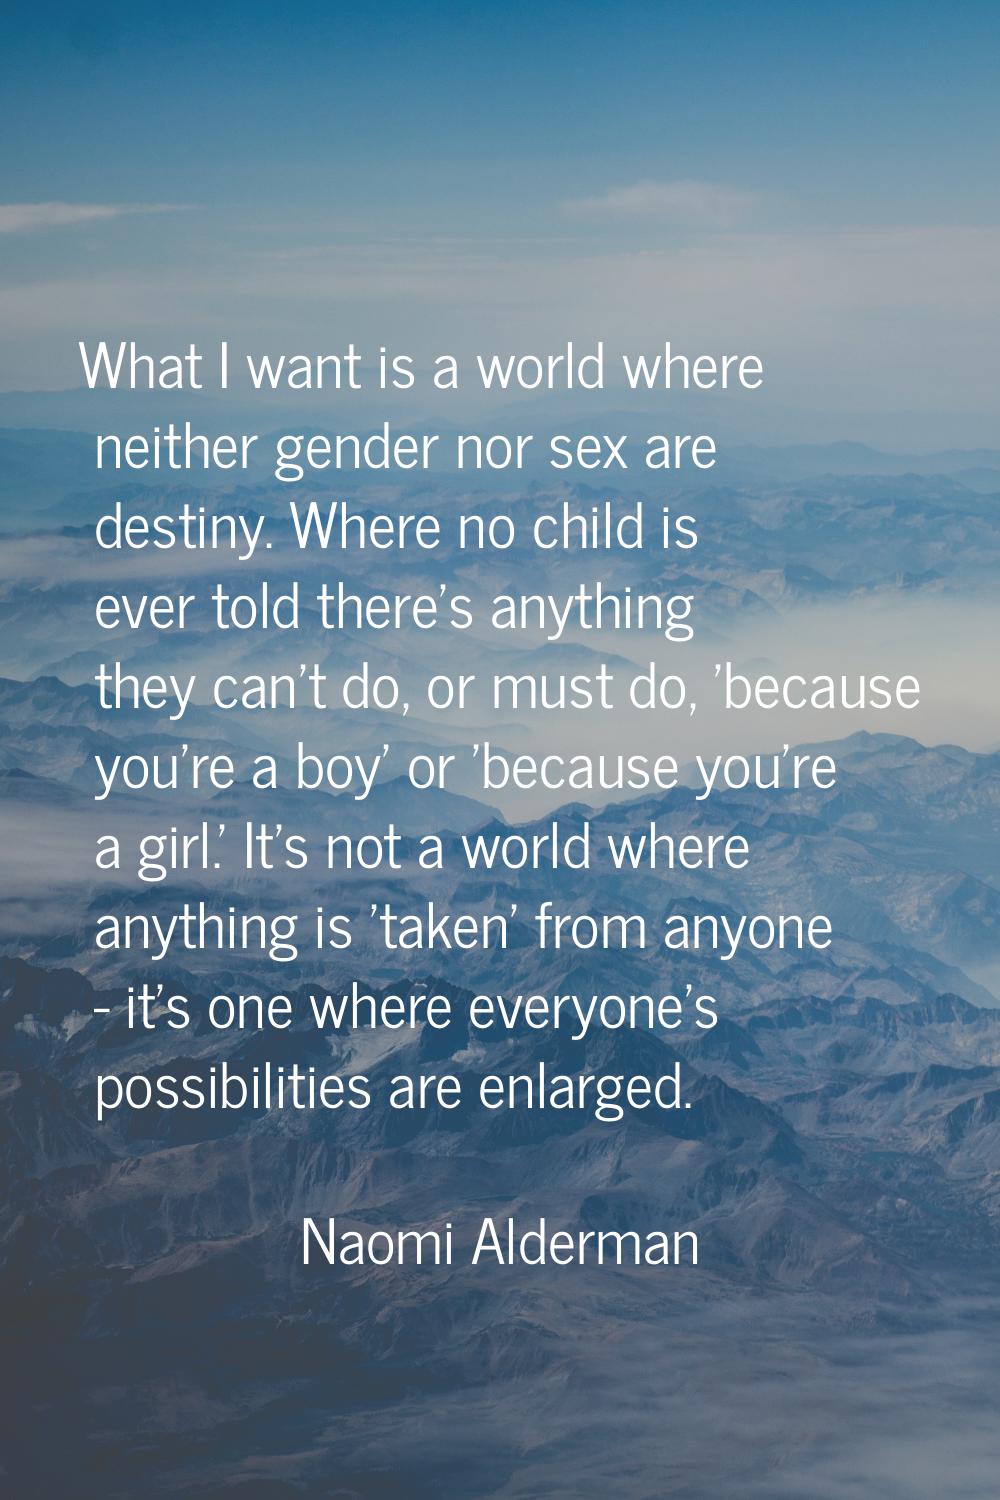 What I want is a world where neither gender nor sex are destiny. Where no child is ever told there'